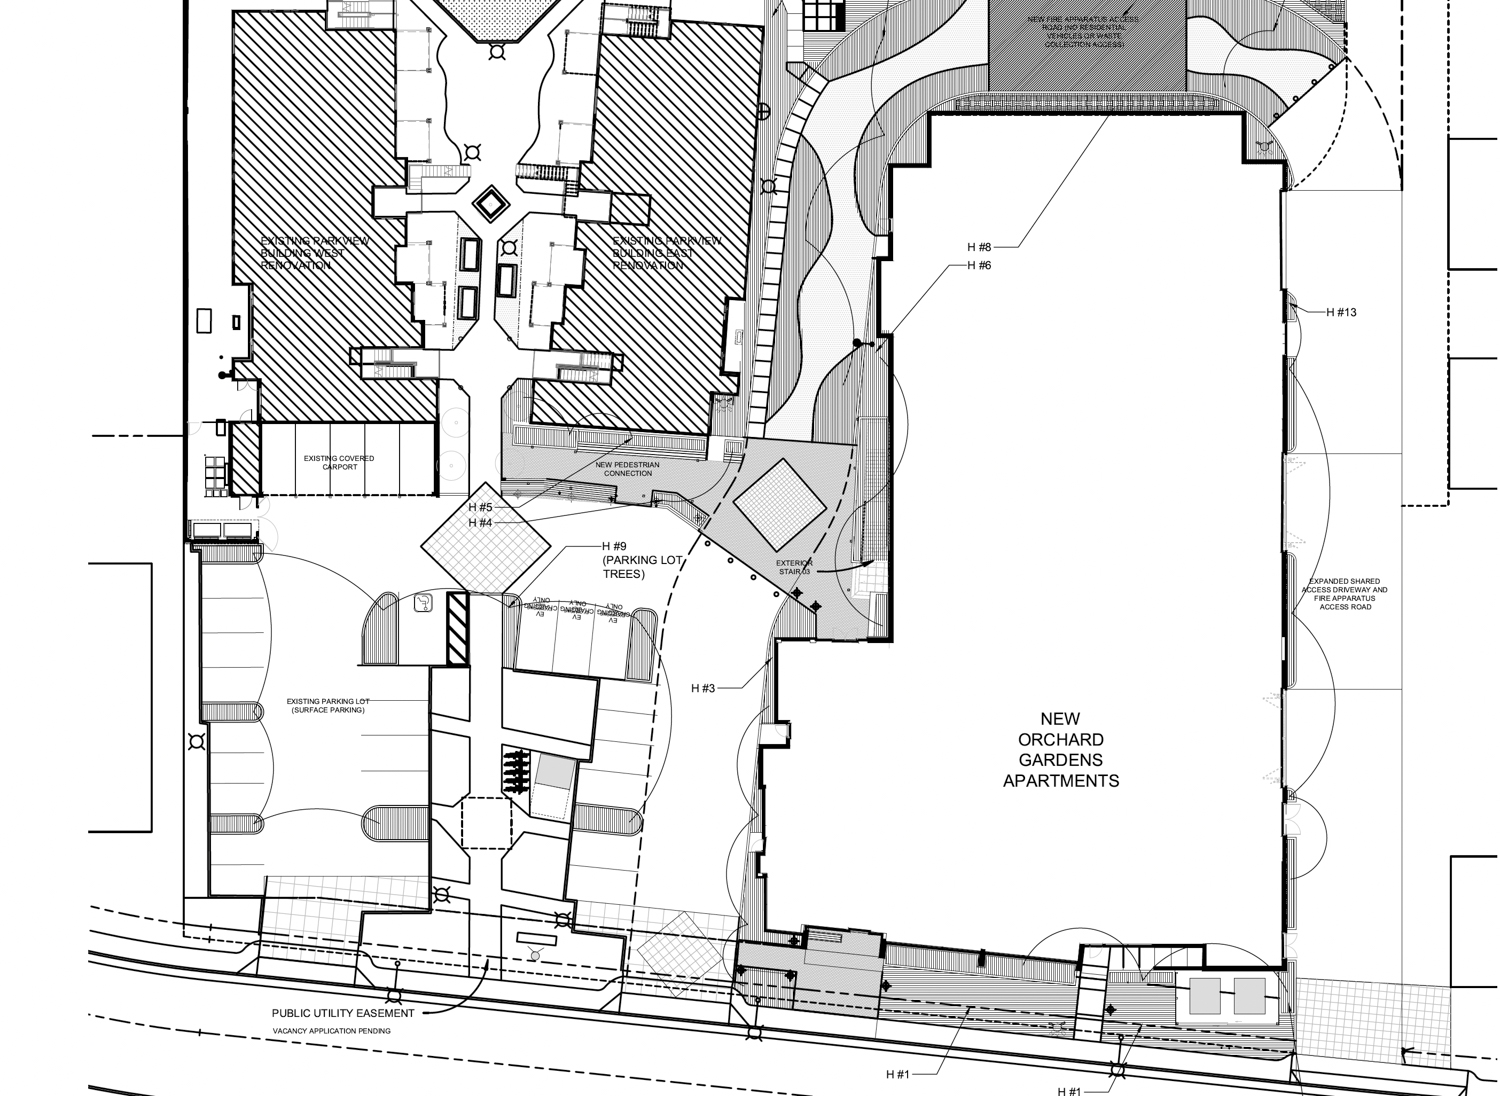 Orchard Gardens site map, illustration by OJK Architecture and Planning